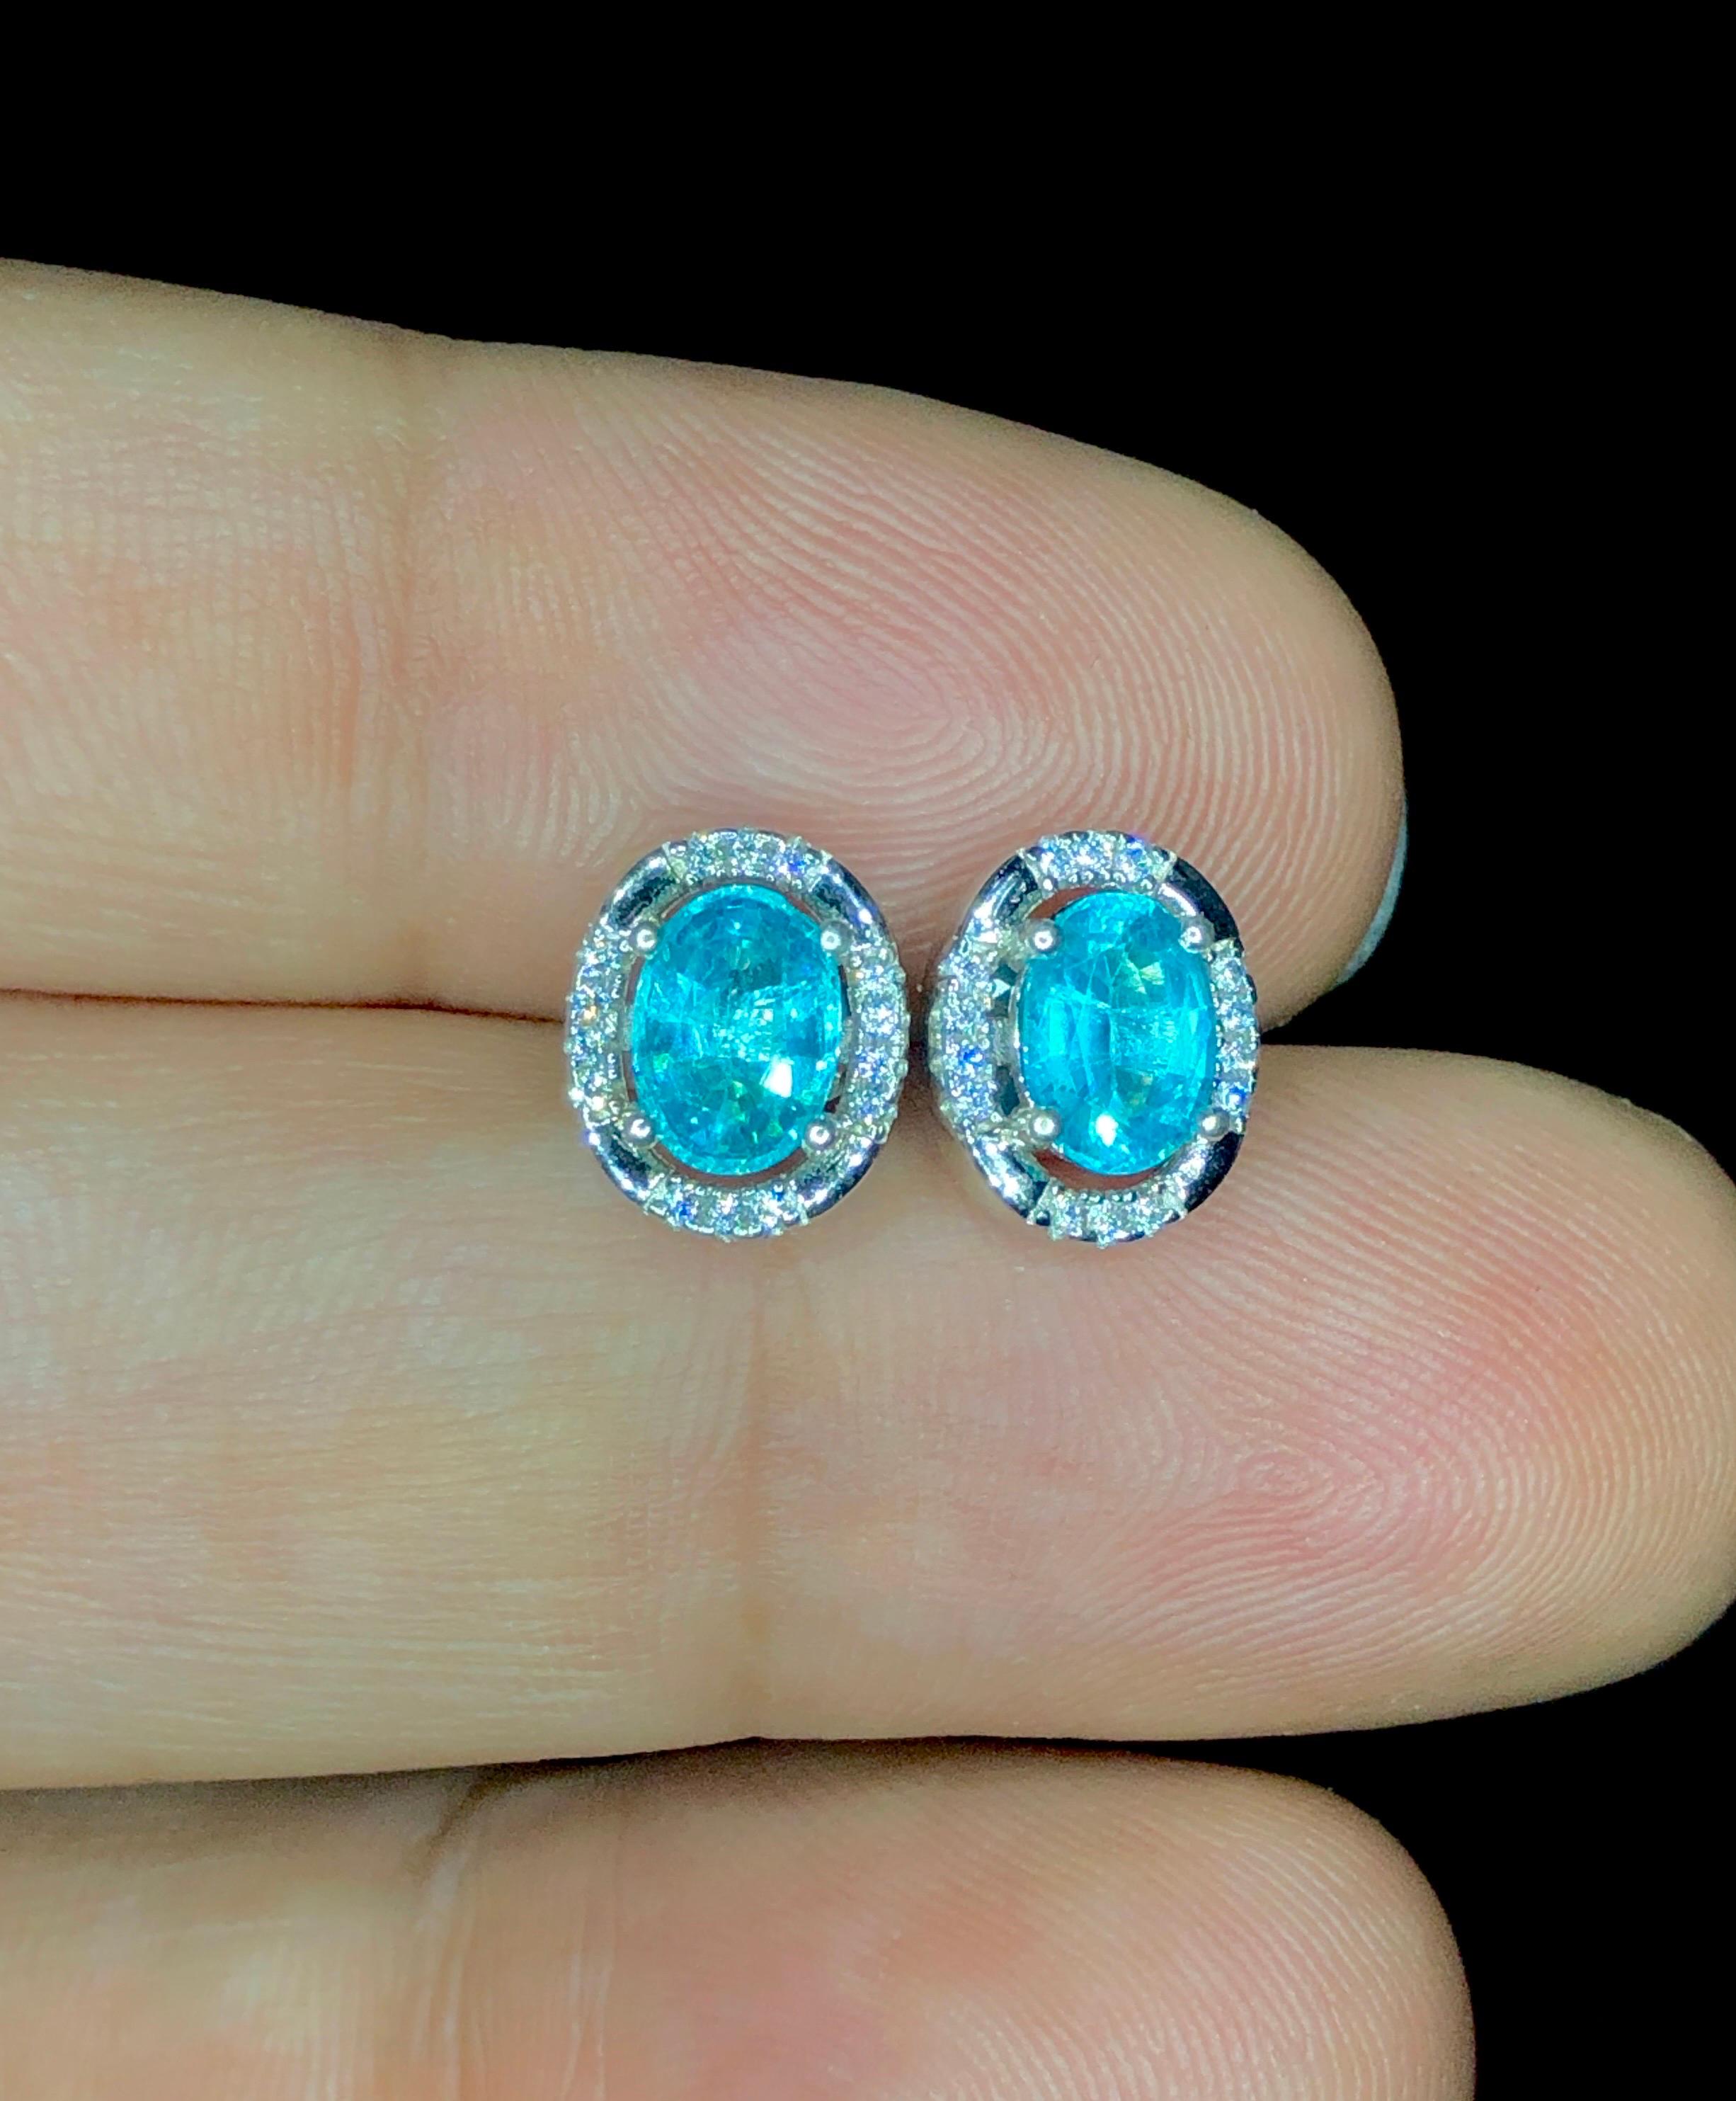 Introducing our stunning new pair of earrings in mesmerizing Paraiba color! Adorned with exquisite Apetite gemstones and complemented by sparkling cubic zirconia, all set in a graceful body of 925 silver. Elevate your style with this radiant